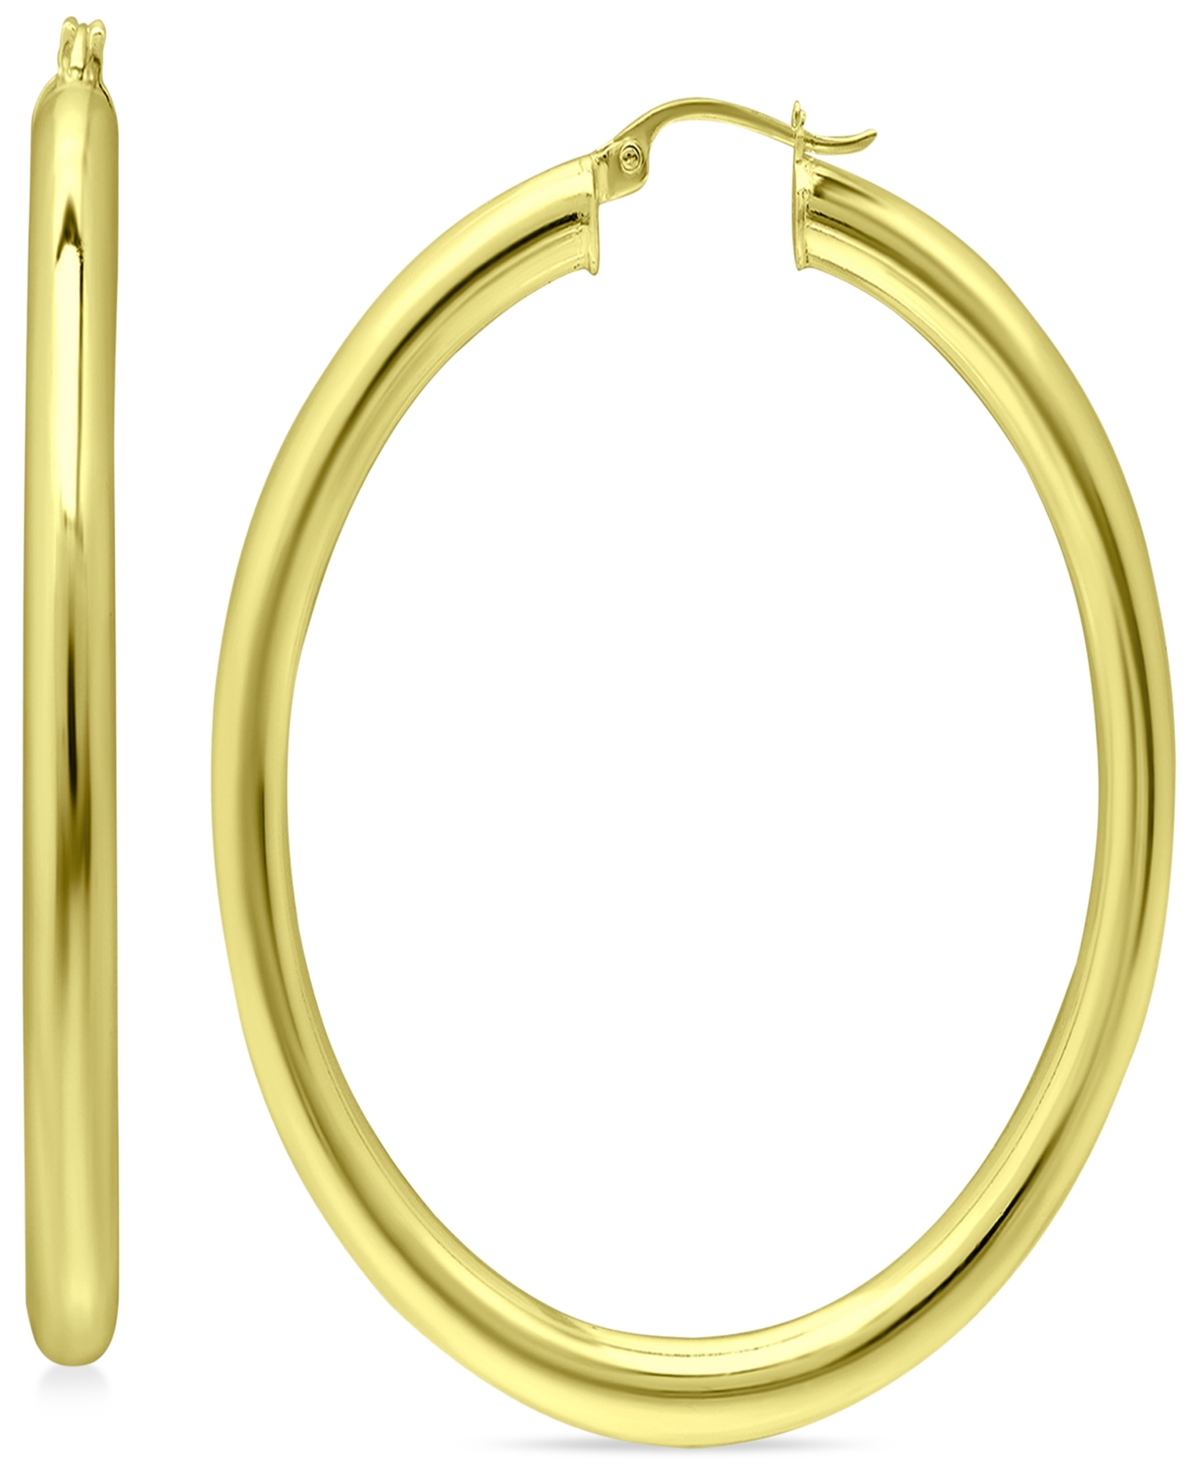 Oval Polished Hoop Earrings in 18k Gold-Plated Sterling Silver, 1-1/8", Created for Macy's - Gold Over Silver